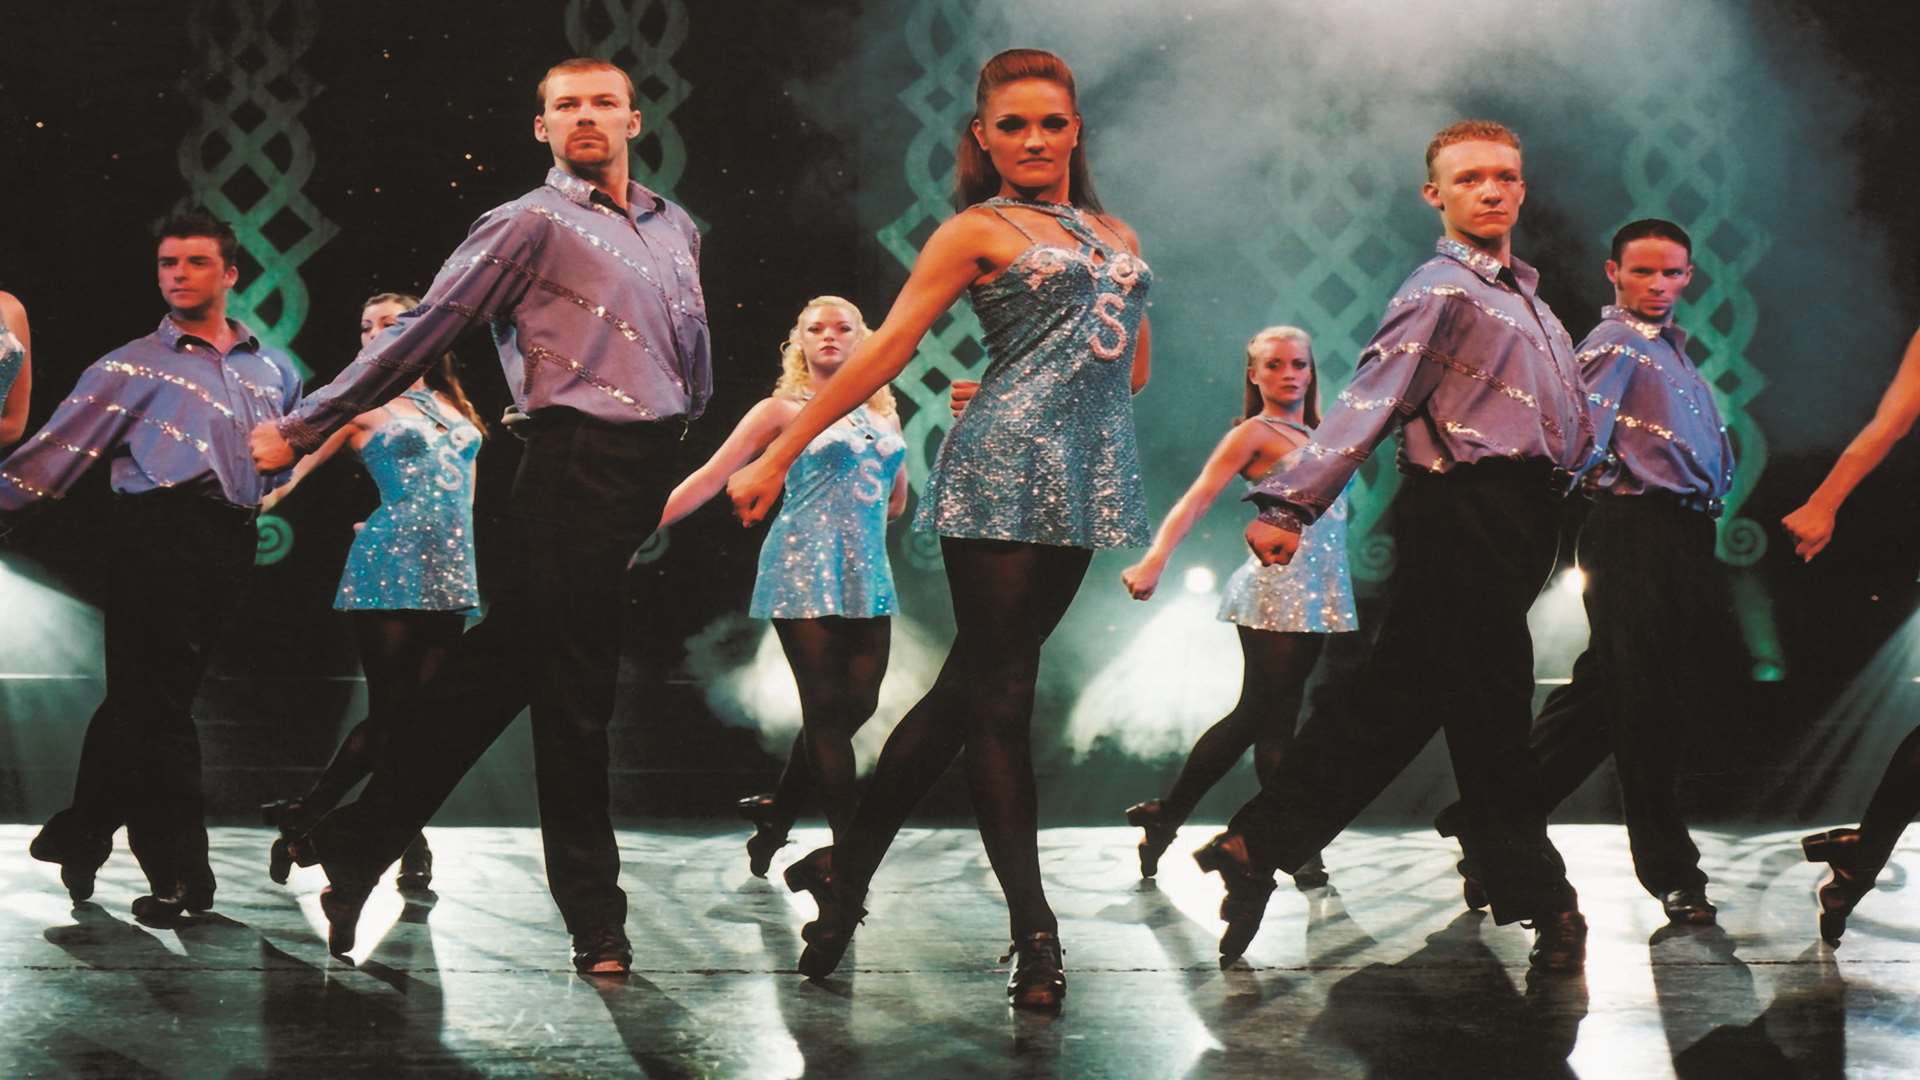 As well as Irish dancing, Spirit of the Dance is influenced by flamenco, tap, jazz and even ballet